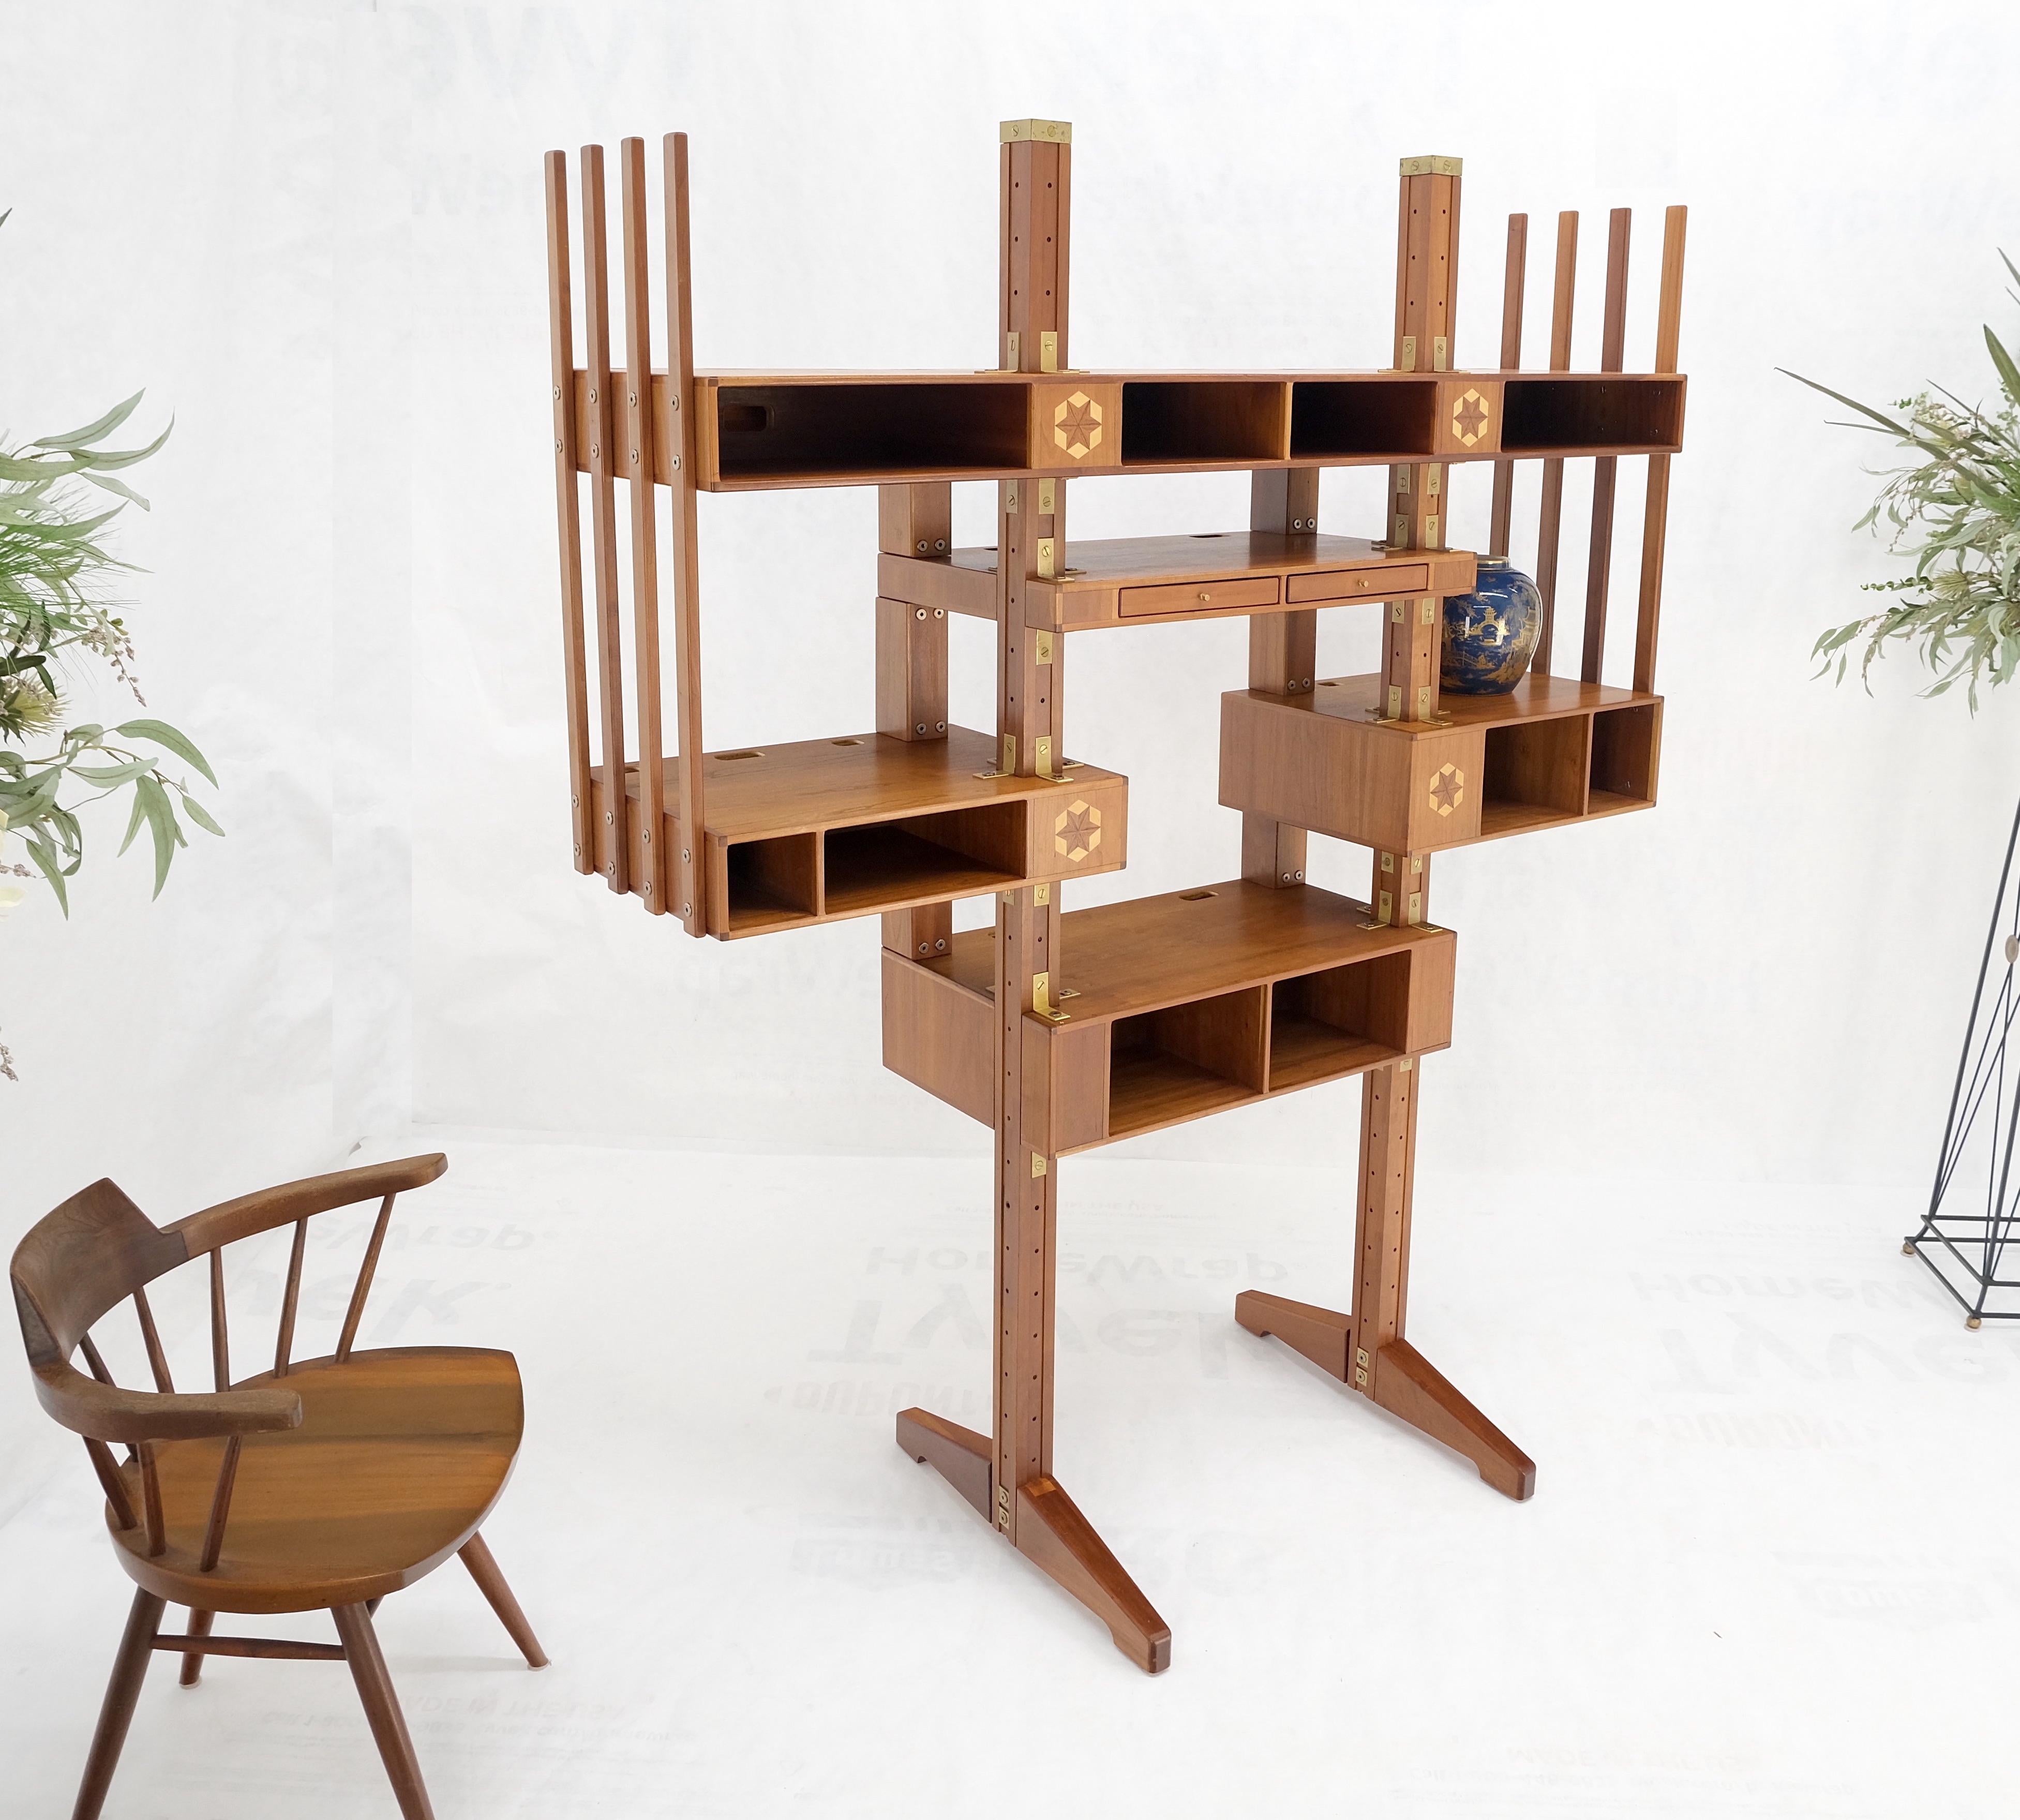 Custom Stereo Equipment Etagere Shelf W/ Sophisticated Concealed Chaise Way Mint For Sale 5